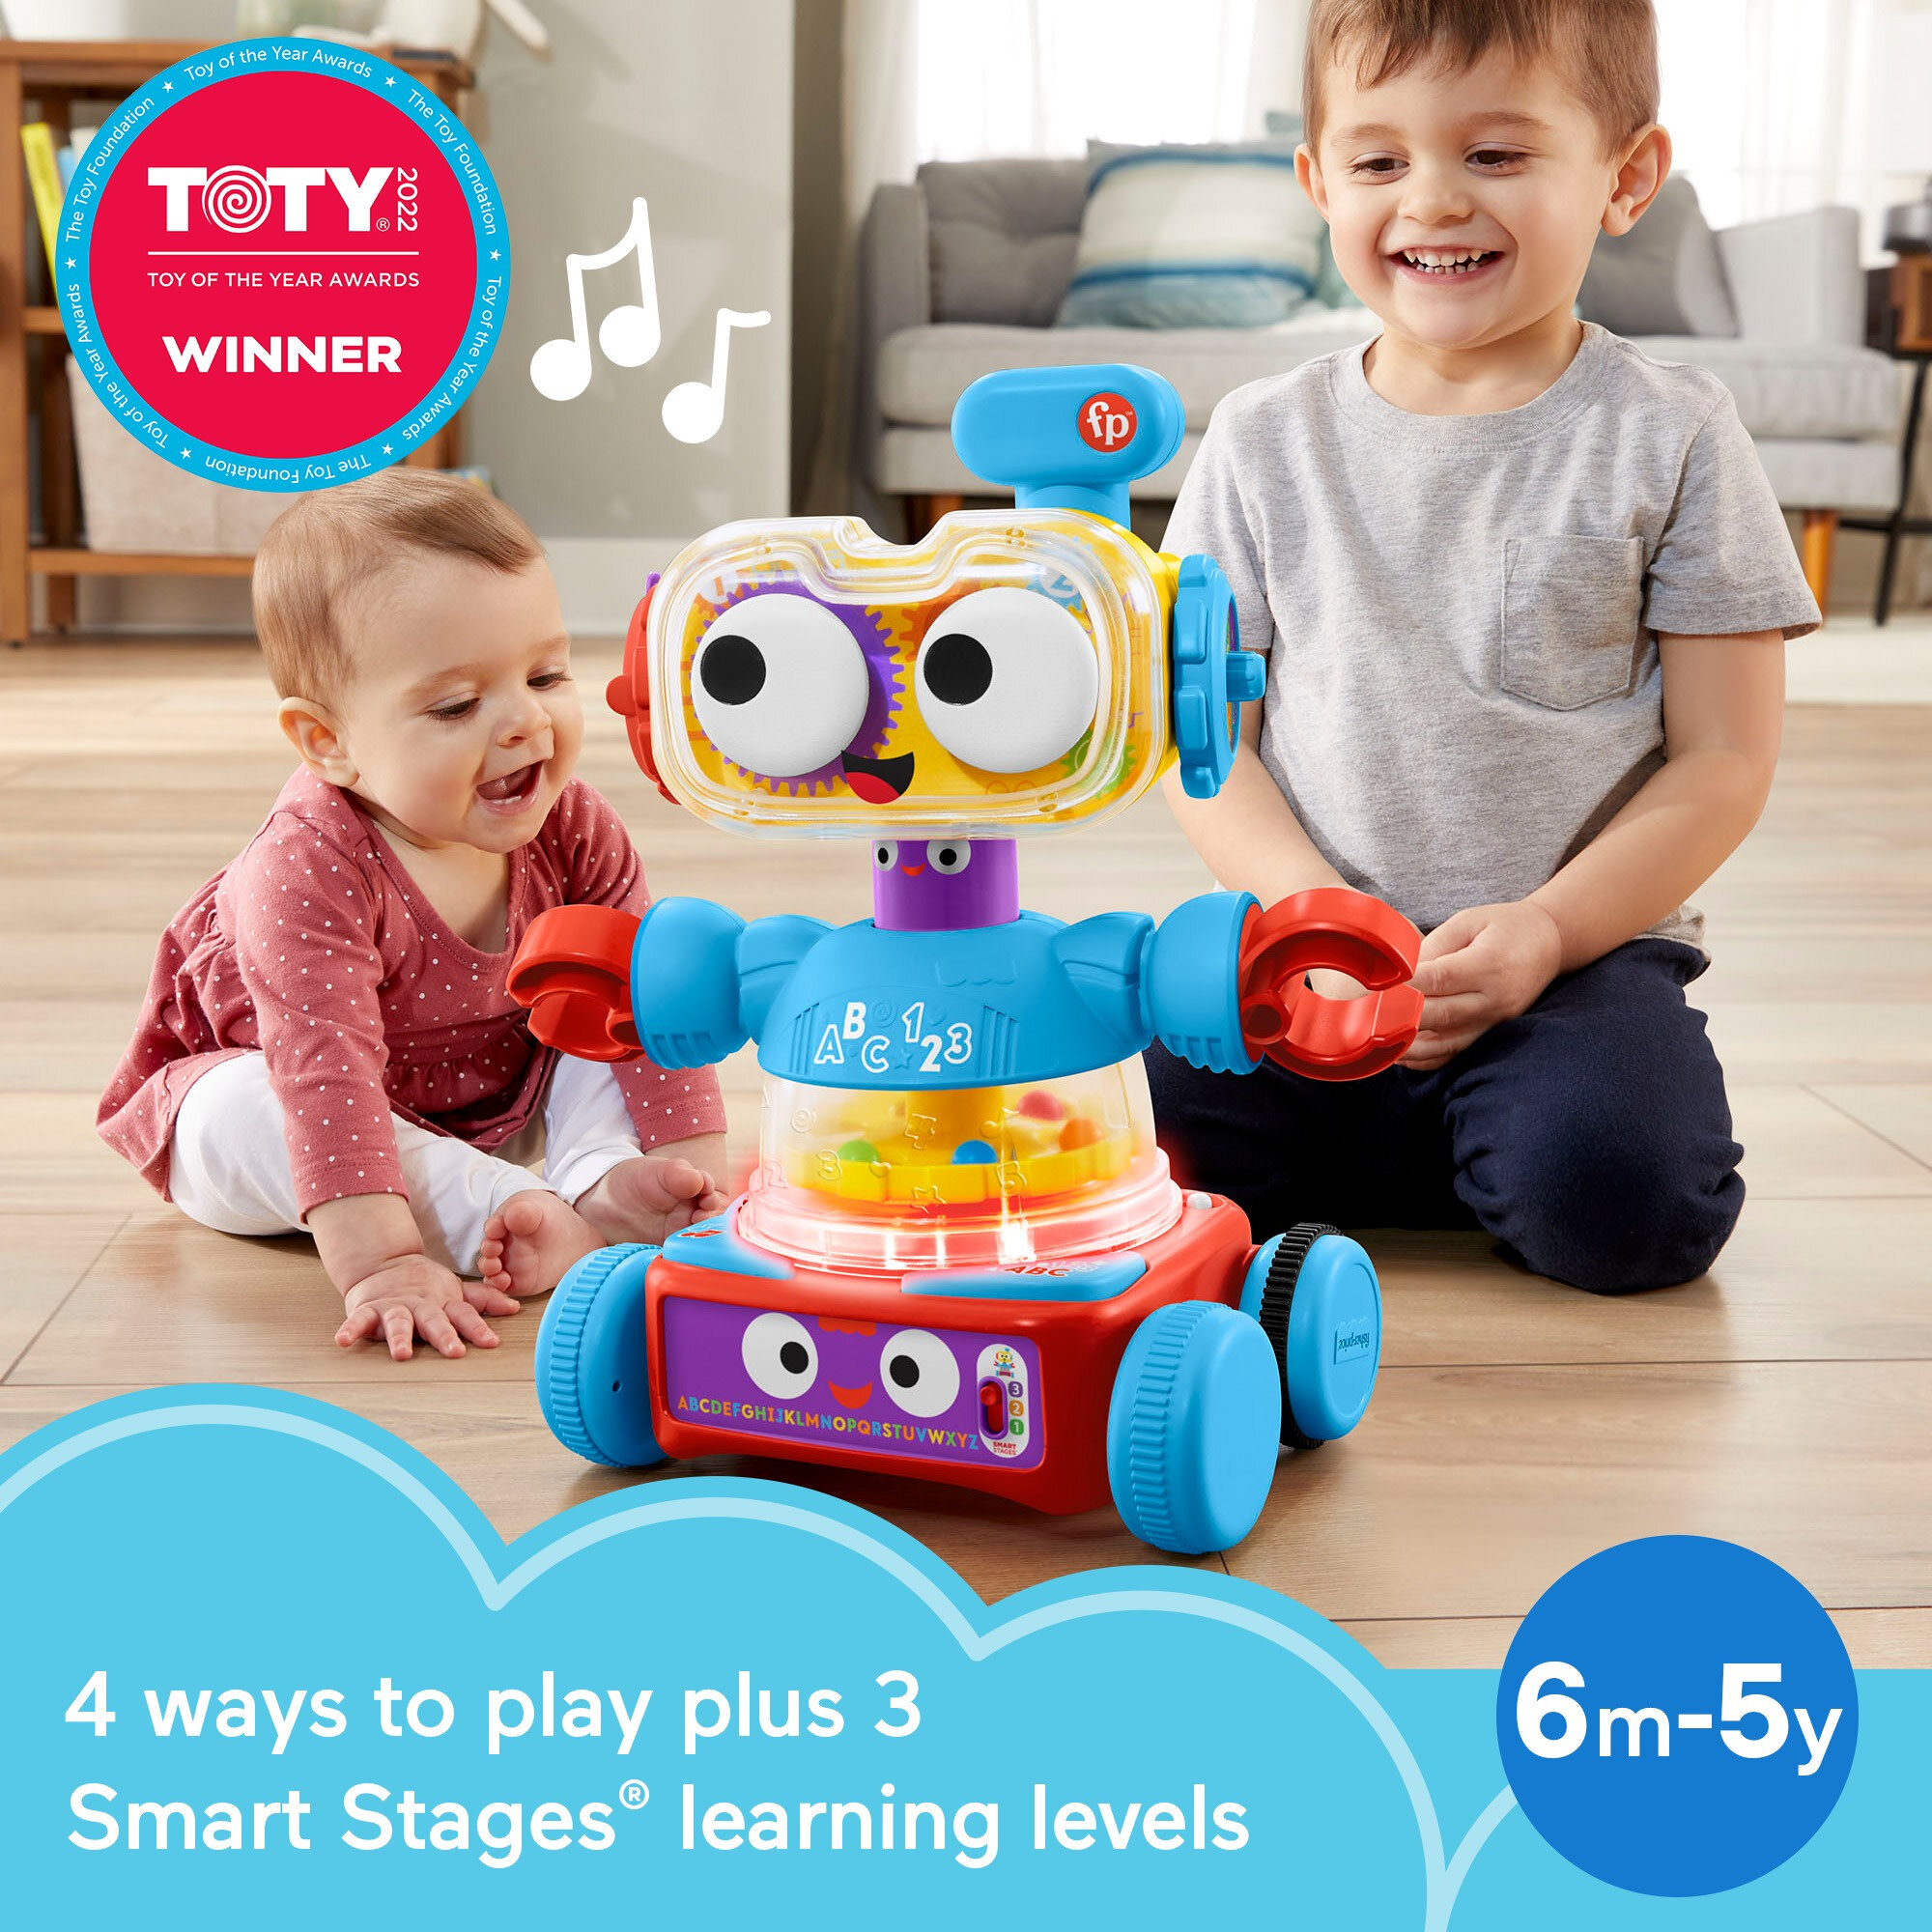 Fisher-Price 4-in-1 Learning Bot Interactive Toy Robot for Infants Toddlers and Preschool Kids - image 4 of 9